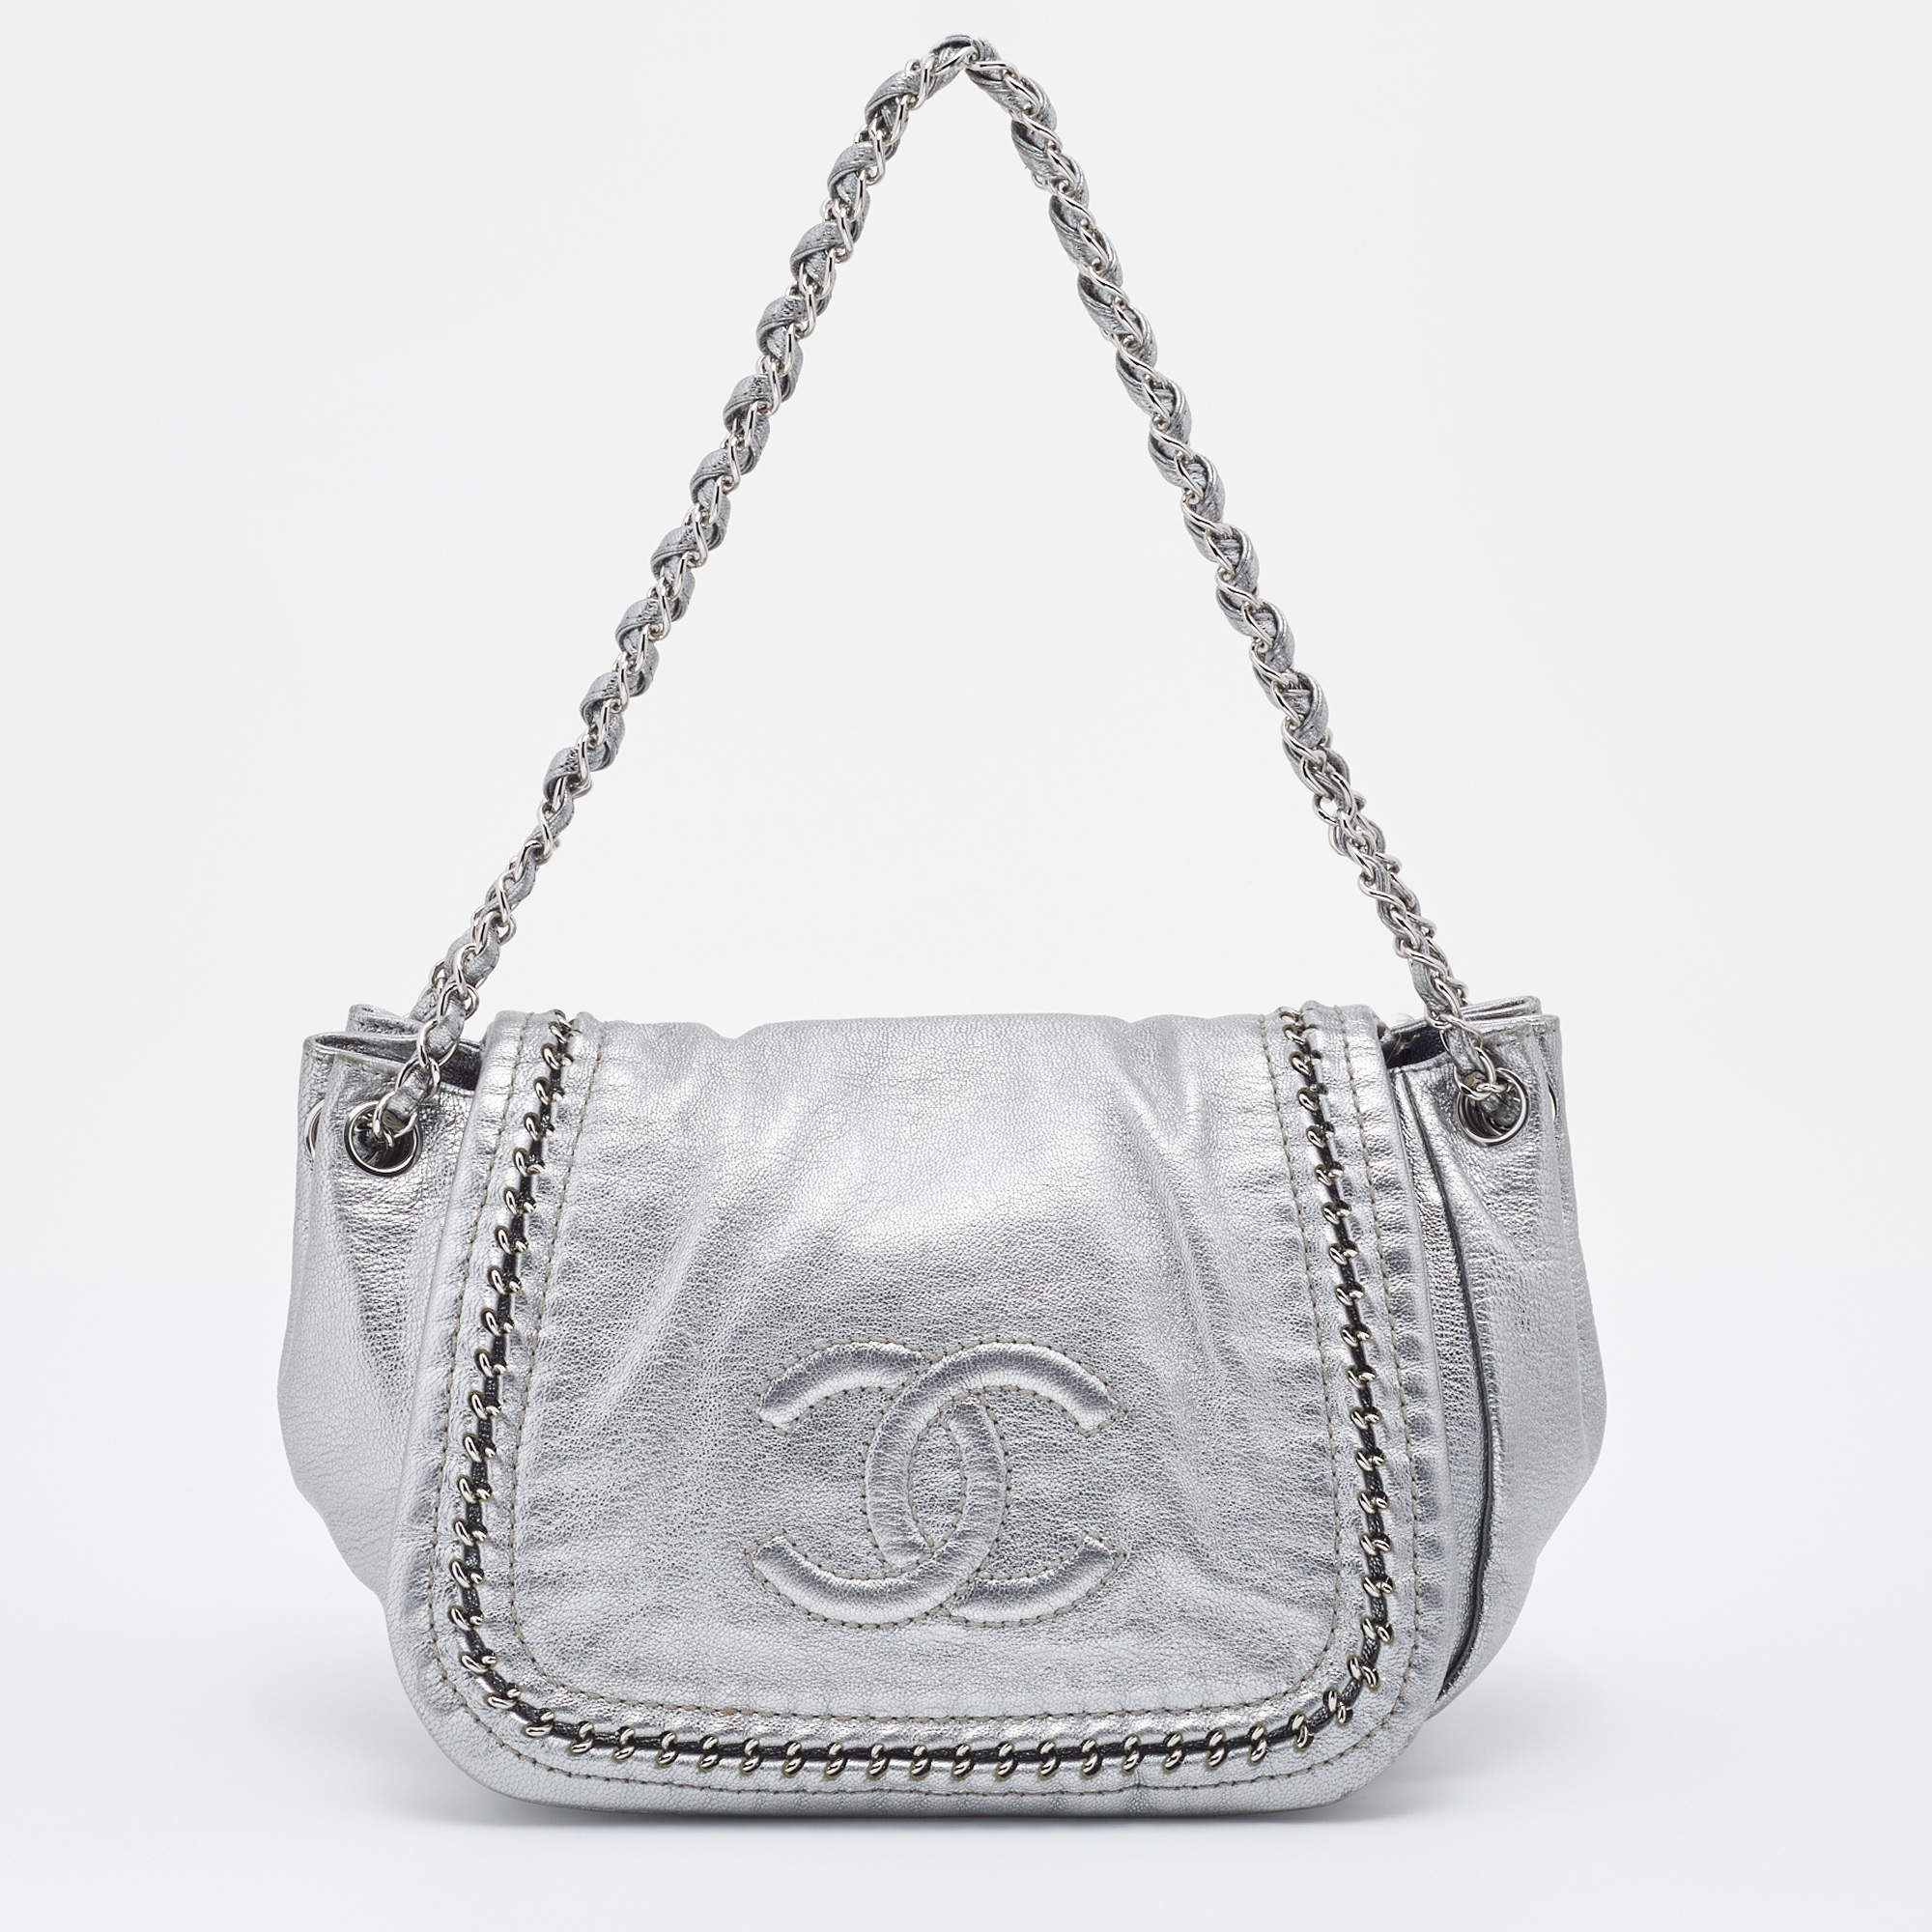 Chanel Luxe Ligne Accordion Flap Bag Leather Silver 497214